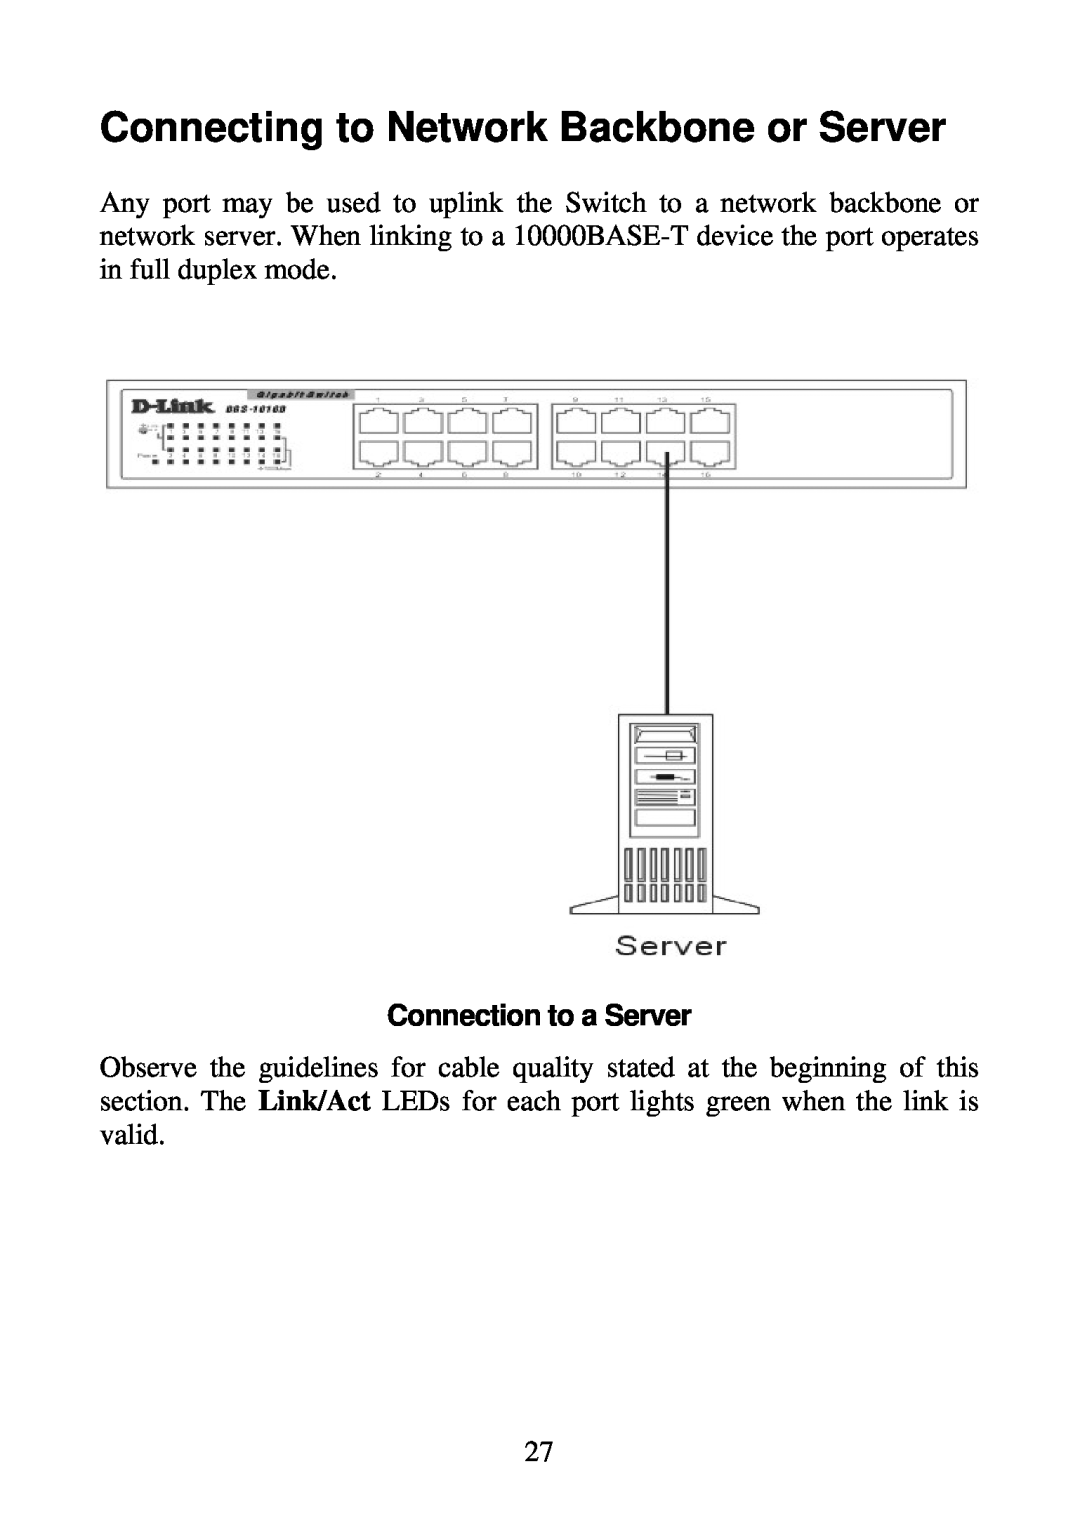 D-Link DGS-1016D, DGS-1024D manual Connecting to Network Backbone or Server, Connection to a Server 